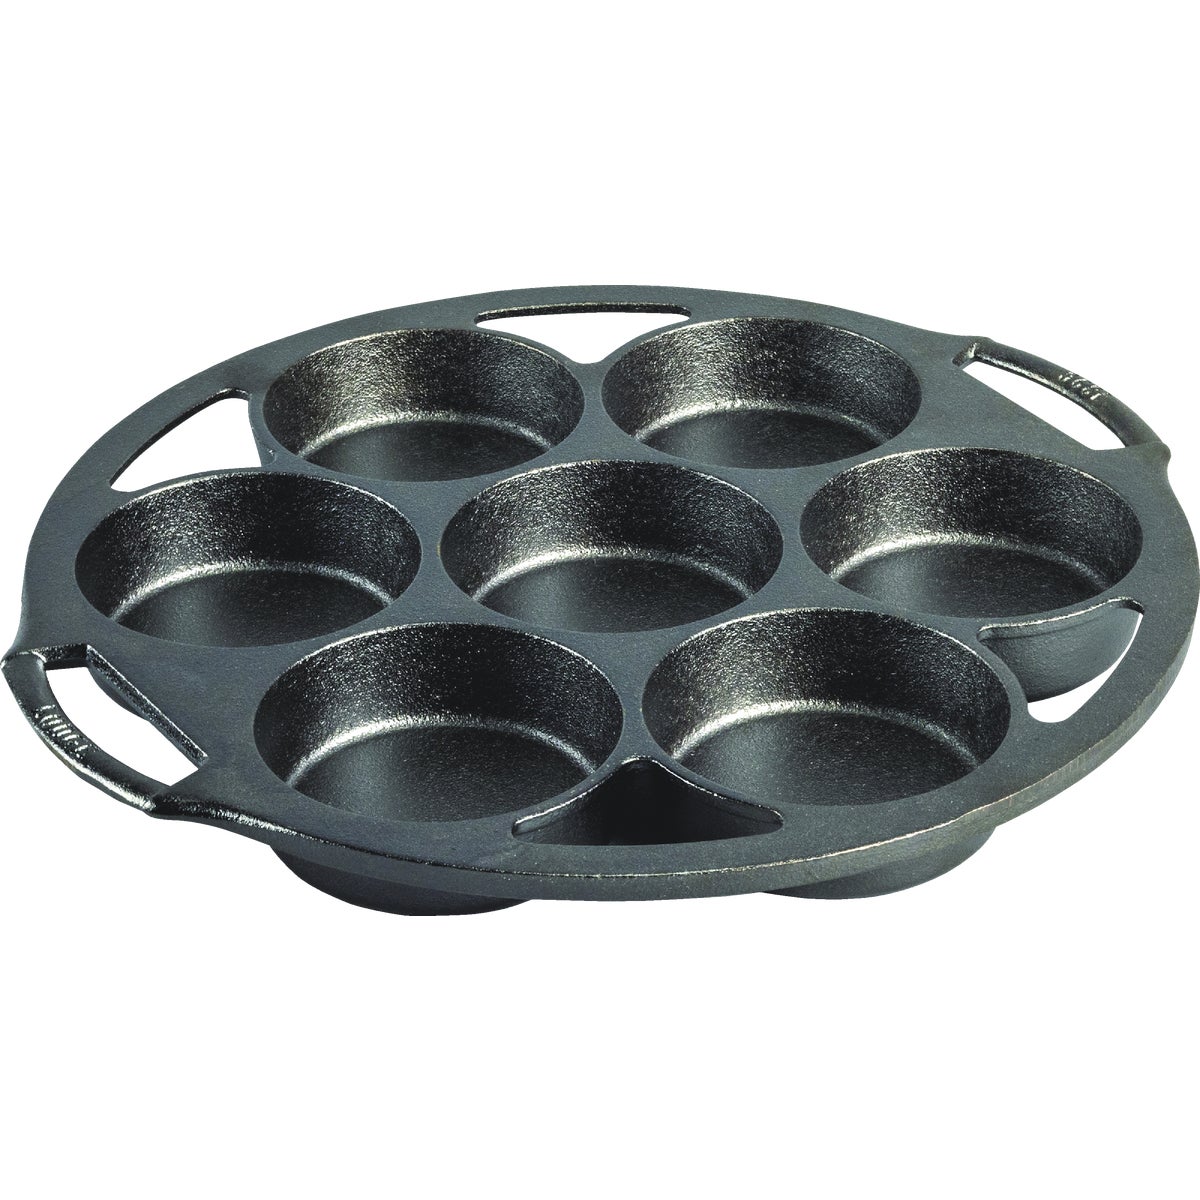 Lodge Cast Iron Biscuit and Mini Cake Baking Pan